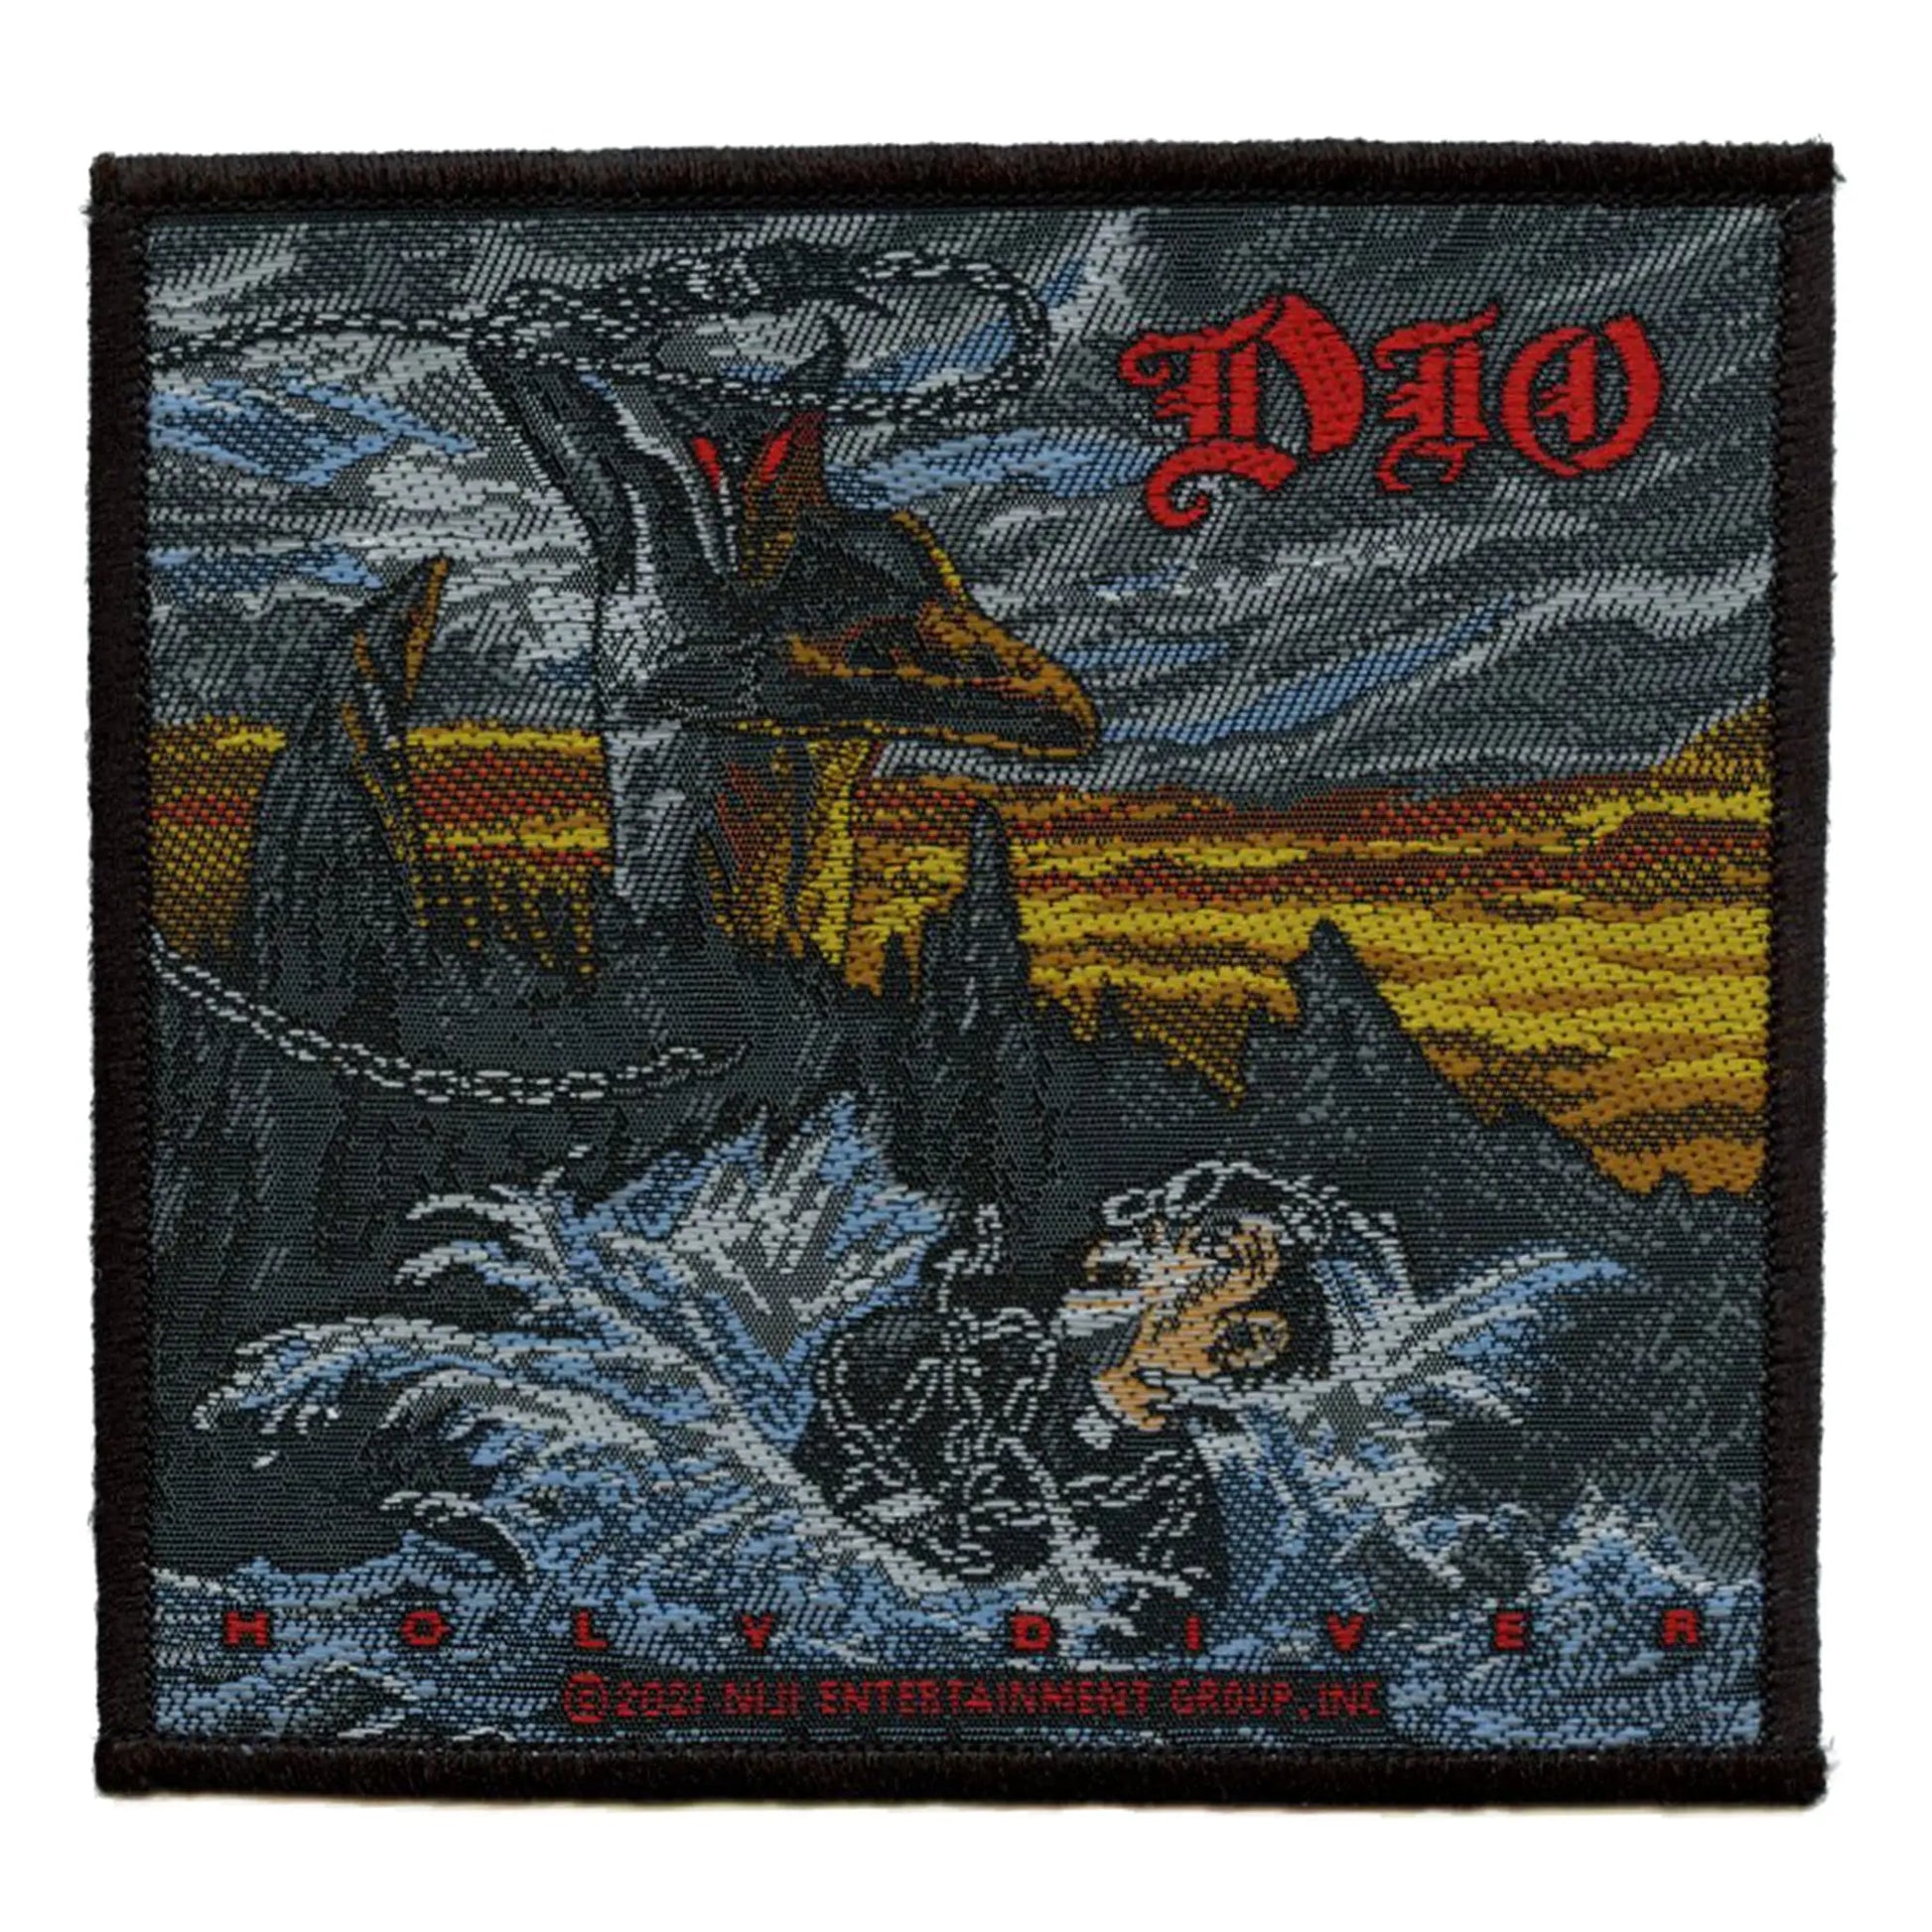 Dio Holy Diver Album Patch Murray Rock Band Woven Iron On